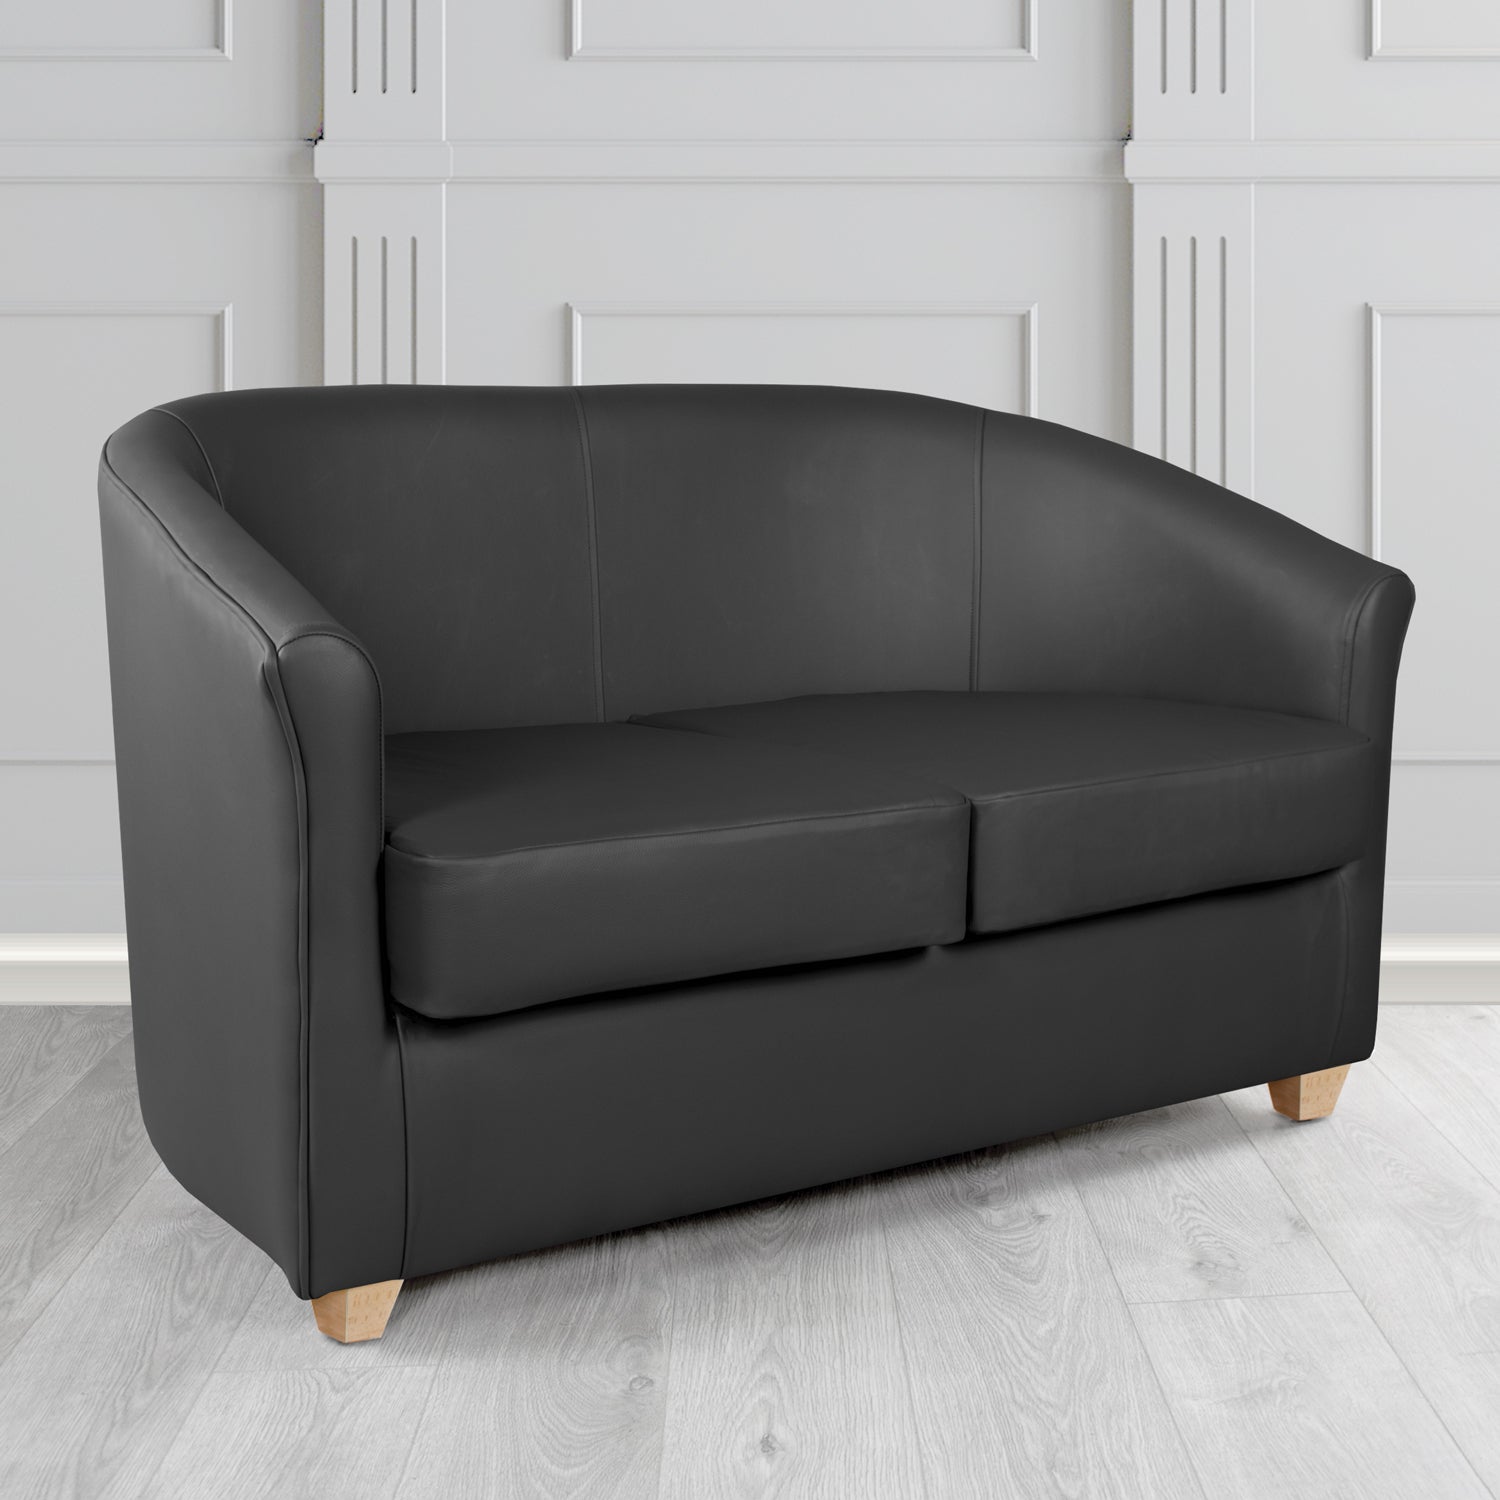 Cannes 2 Seater Tub Sofa in Madrid Black Faux Leather - The Tub Chair Shop